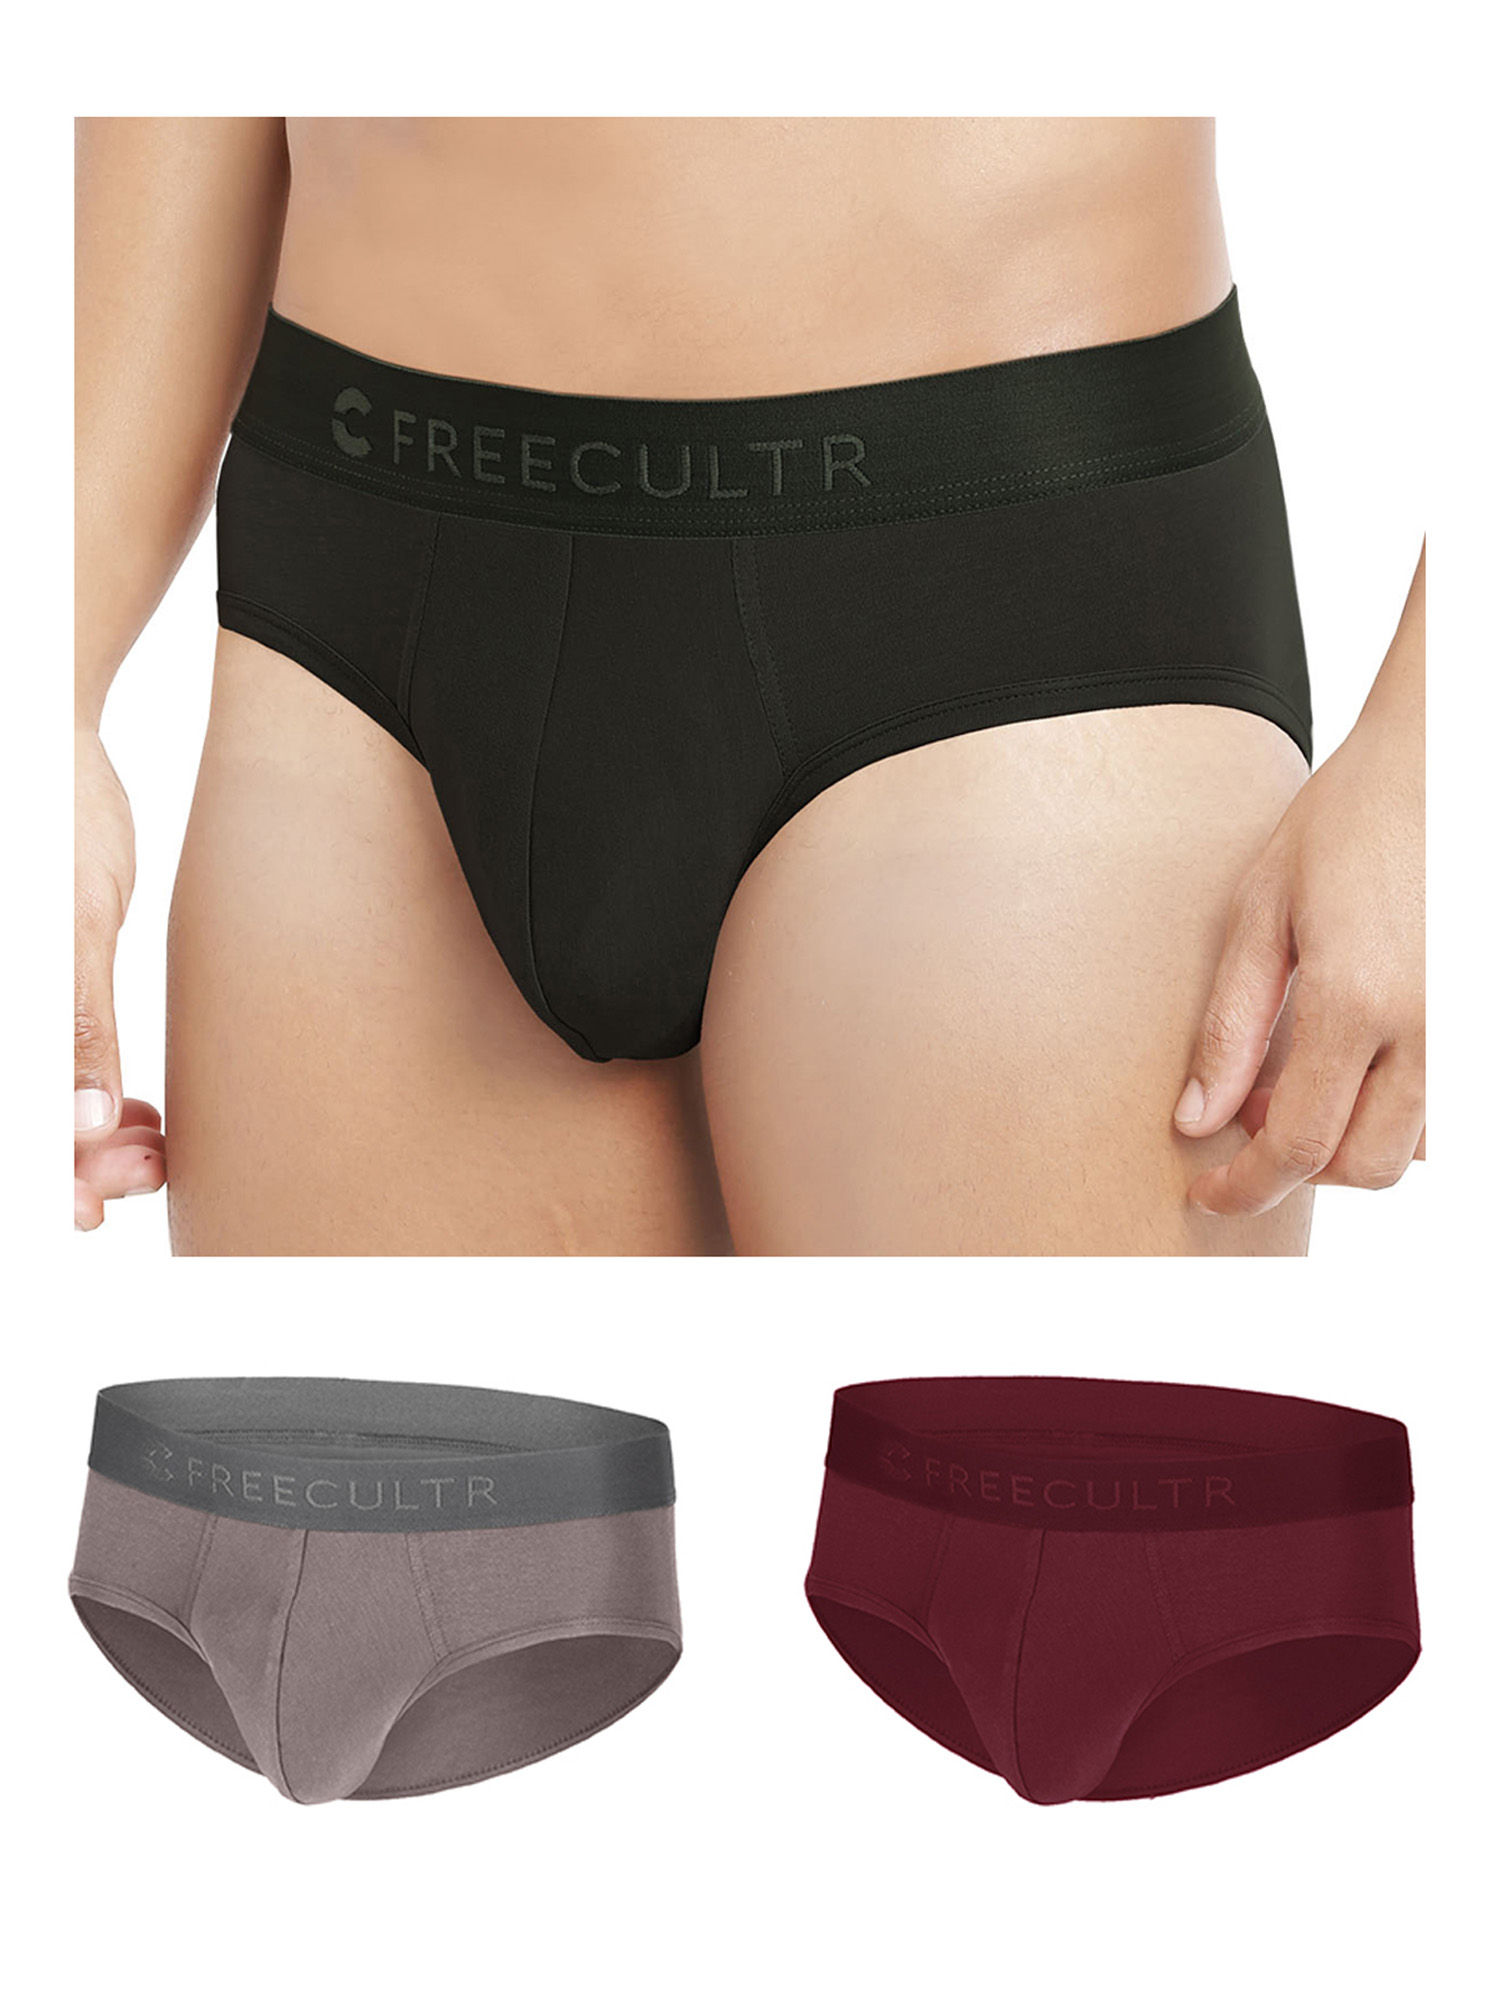 FREECULTR Anti-Microbial Air-Soft Micromodal Underwear Brief Pack Of 3 - Multi-Color (M)